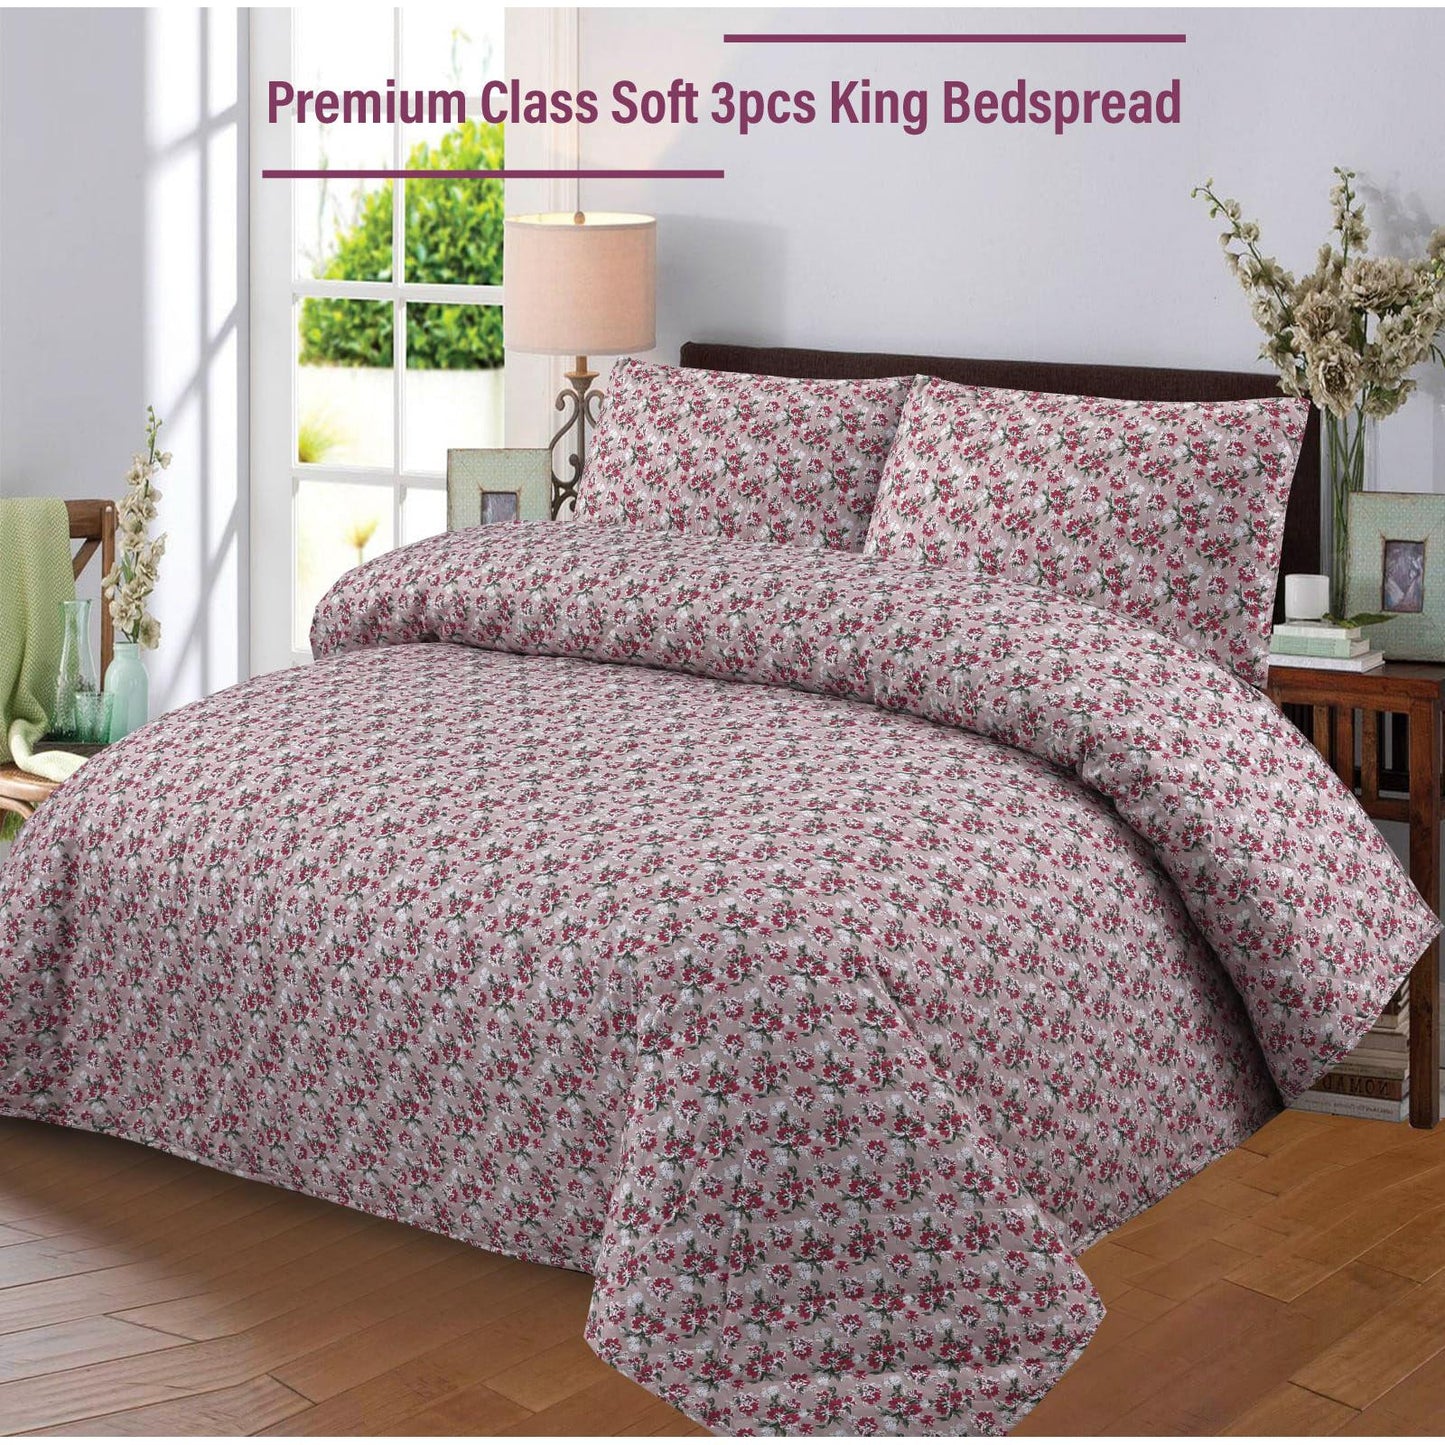 Quilted 3 Layers Bedspread Printed - 3pcs Set #9367